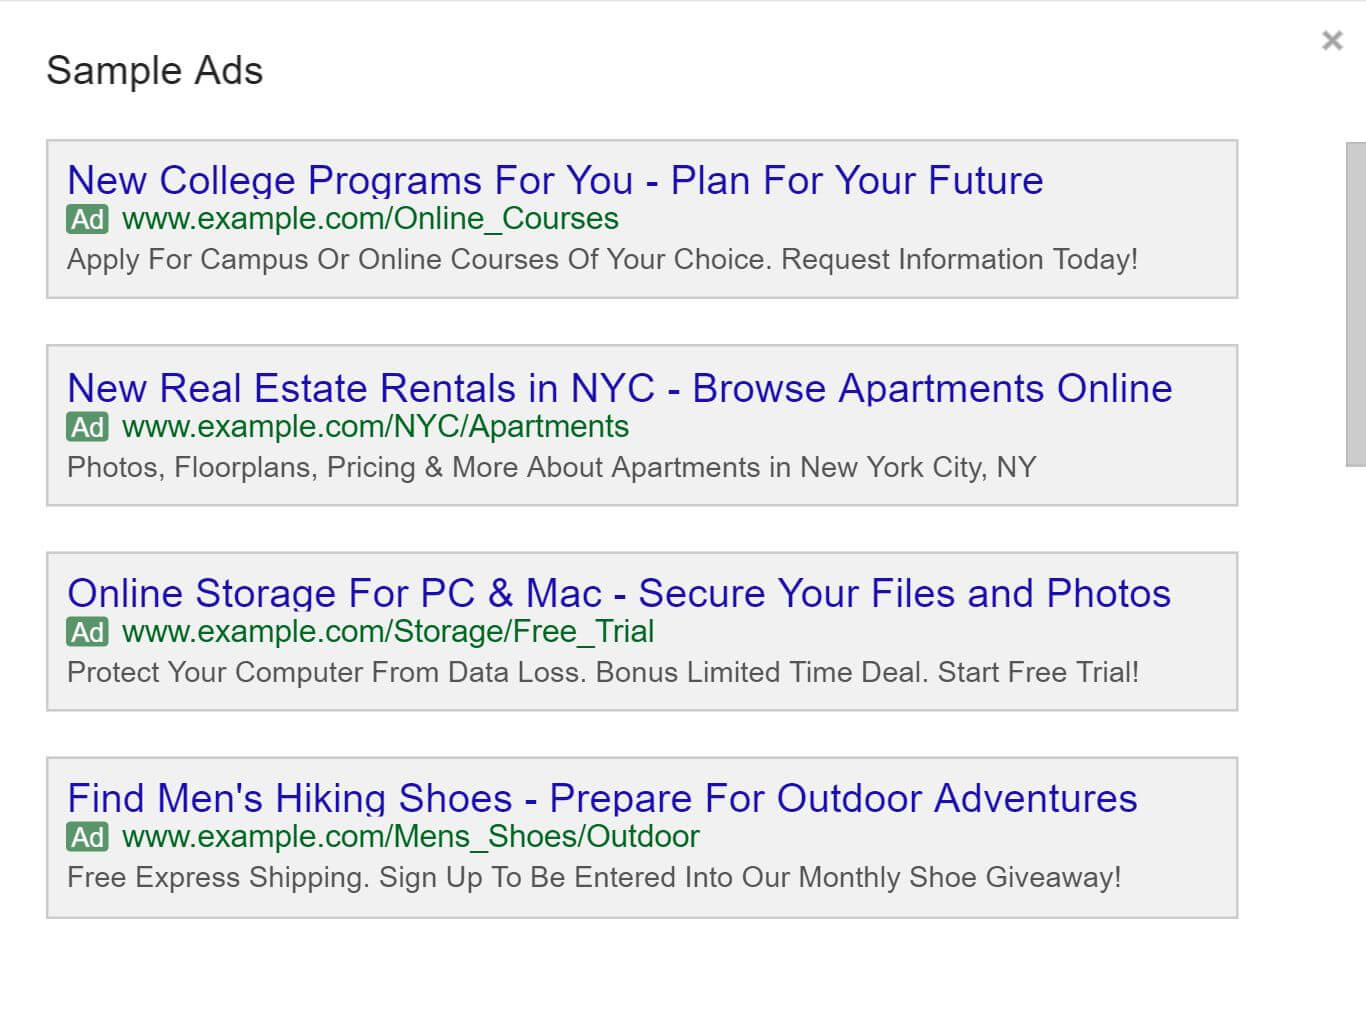 adwords-sample-ads-preview.jpg